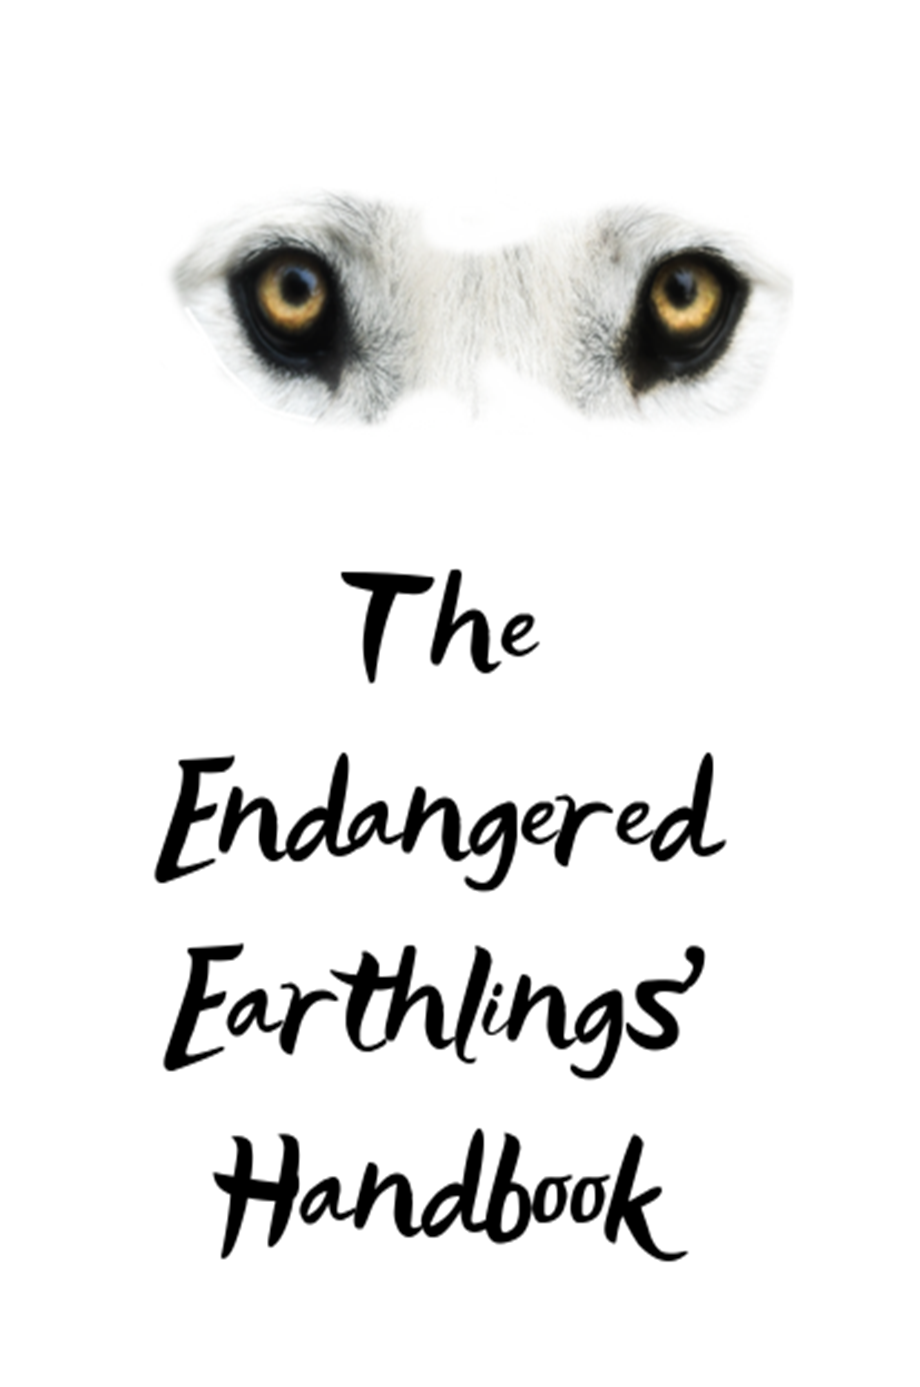 The Endangered Earthlings' Handbook features the eyes of a wolf, a quickly disappearing species.